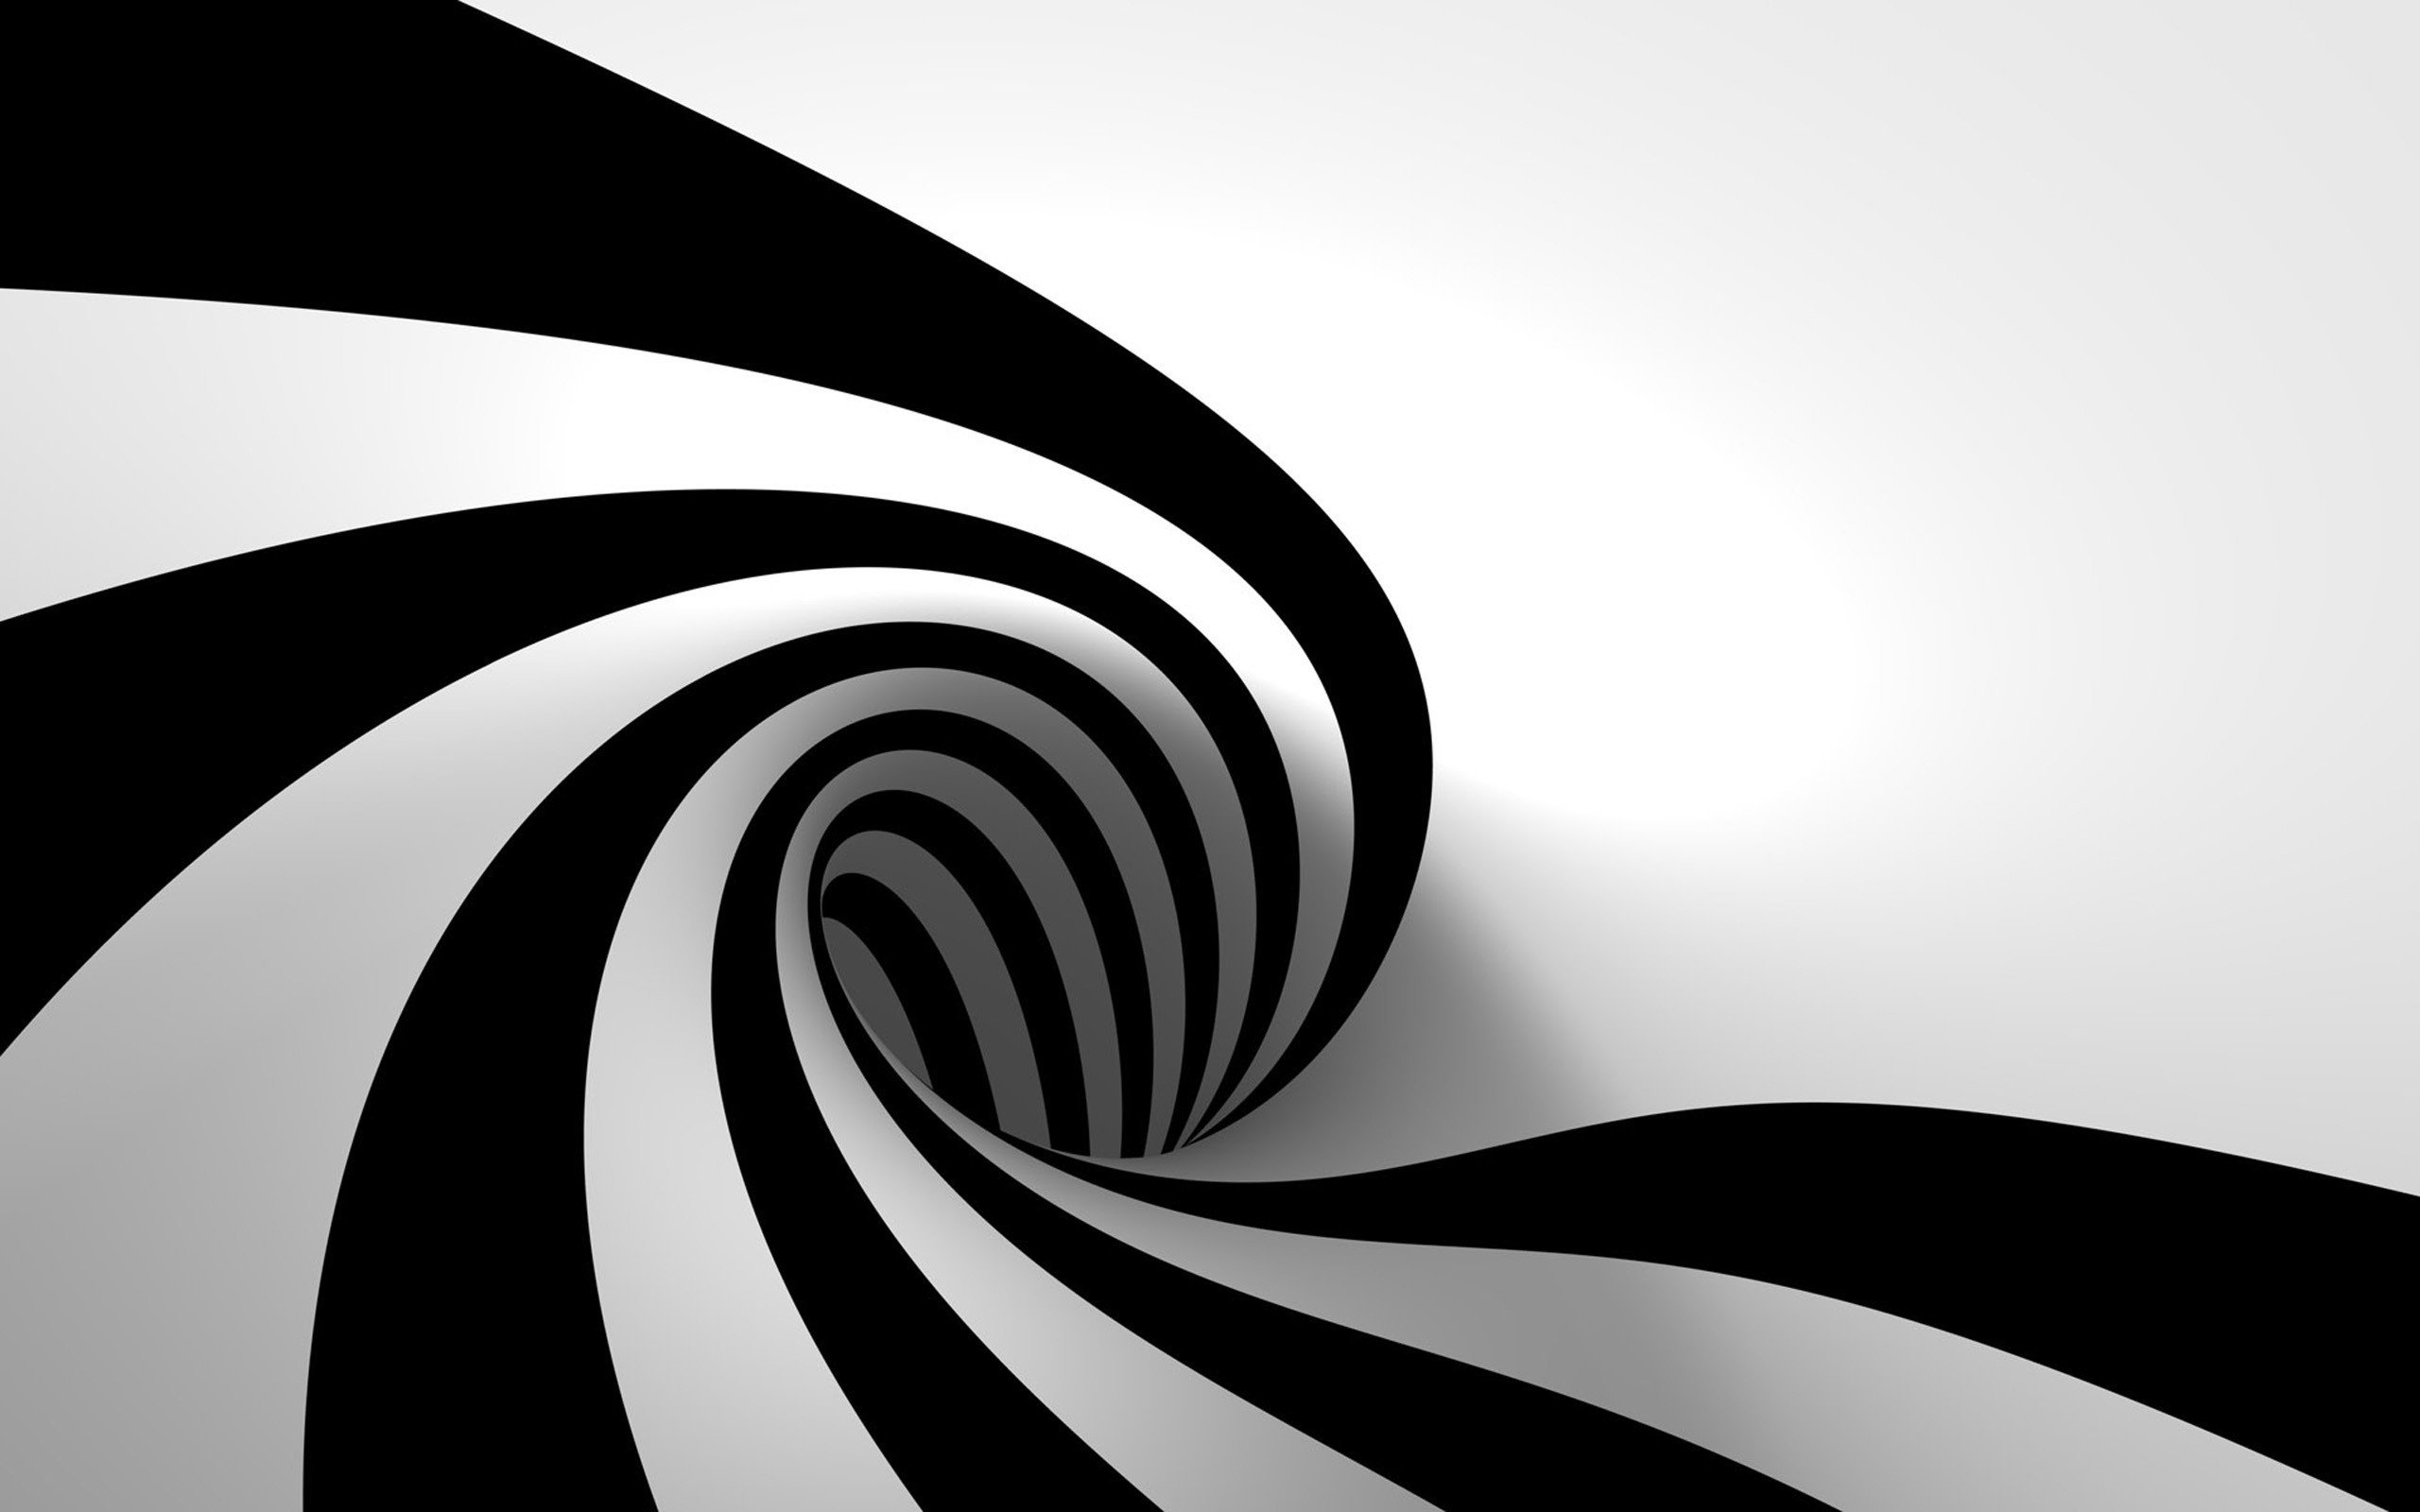 Black and white whirlpool desktop wallpapers hd 5786 2560x1600